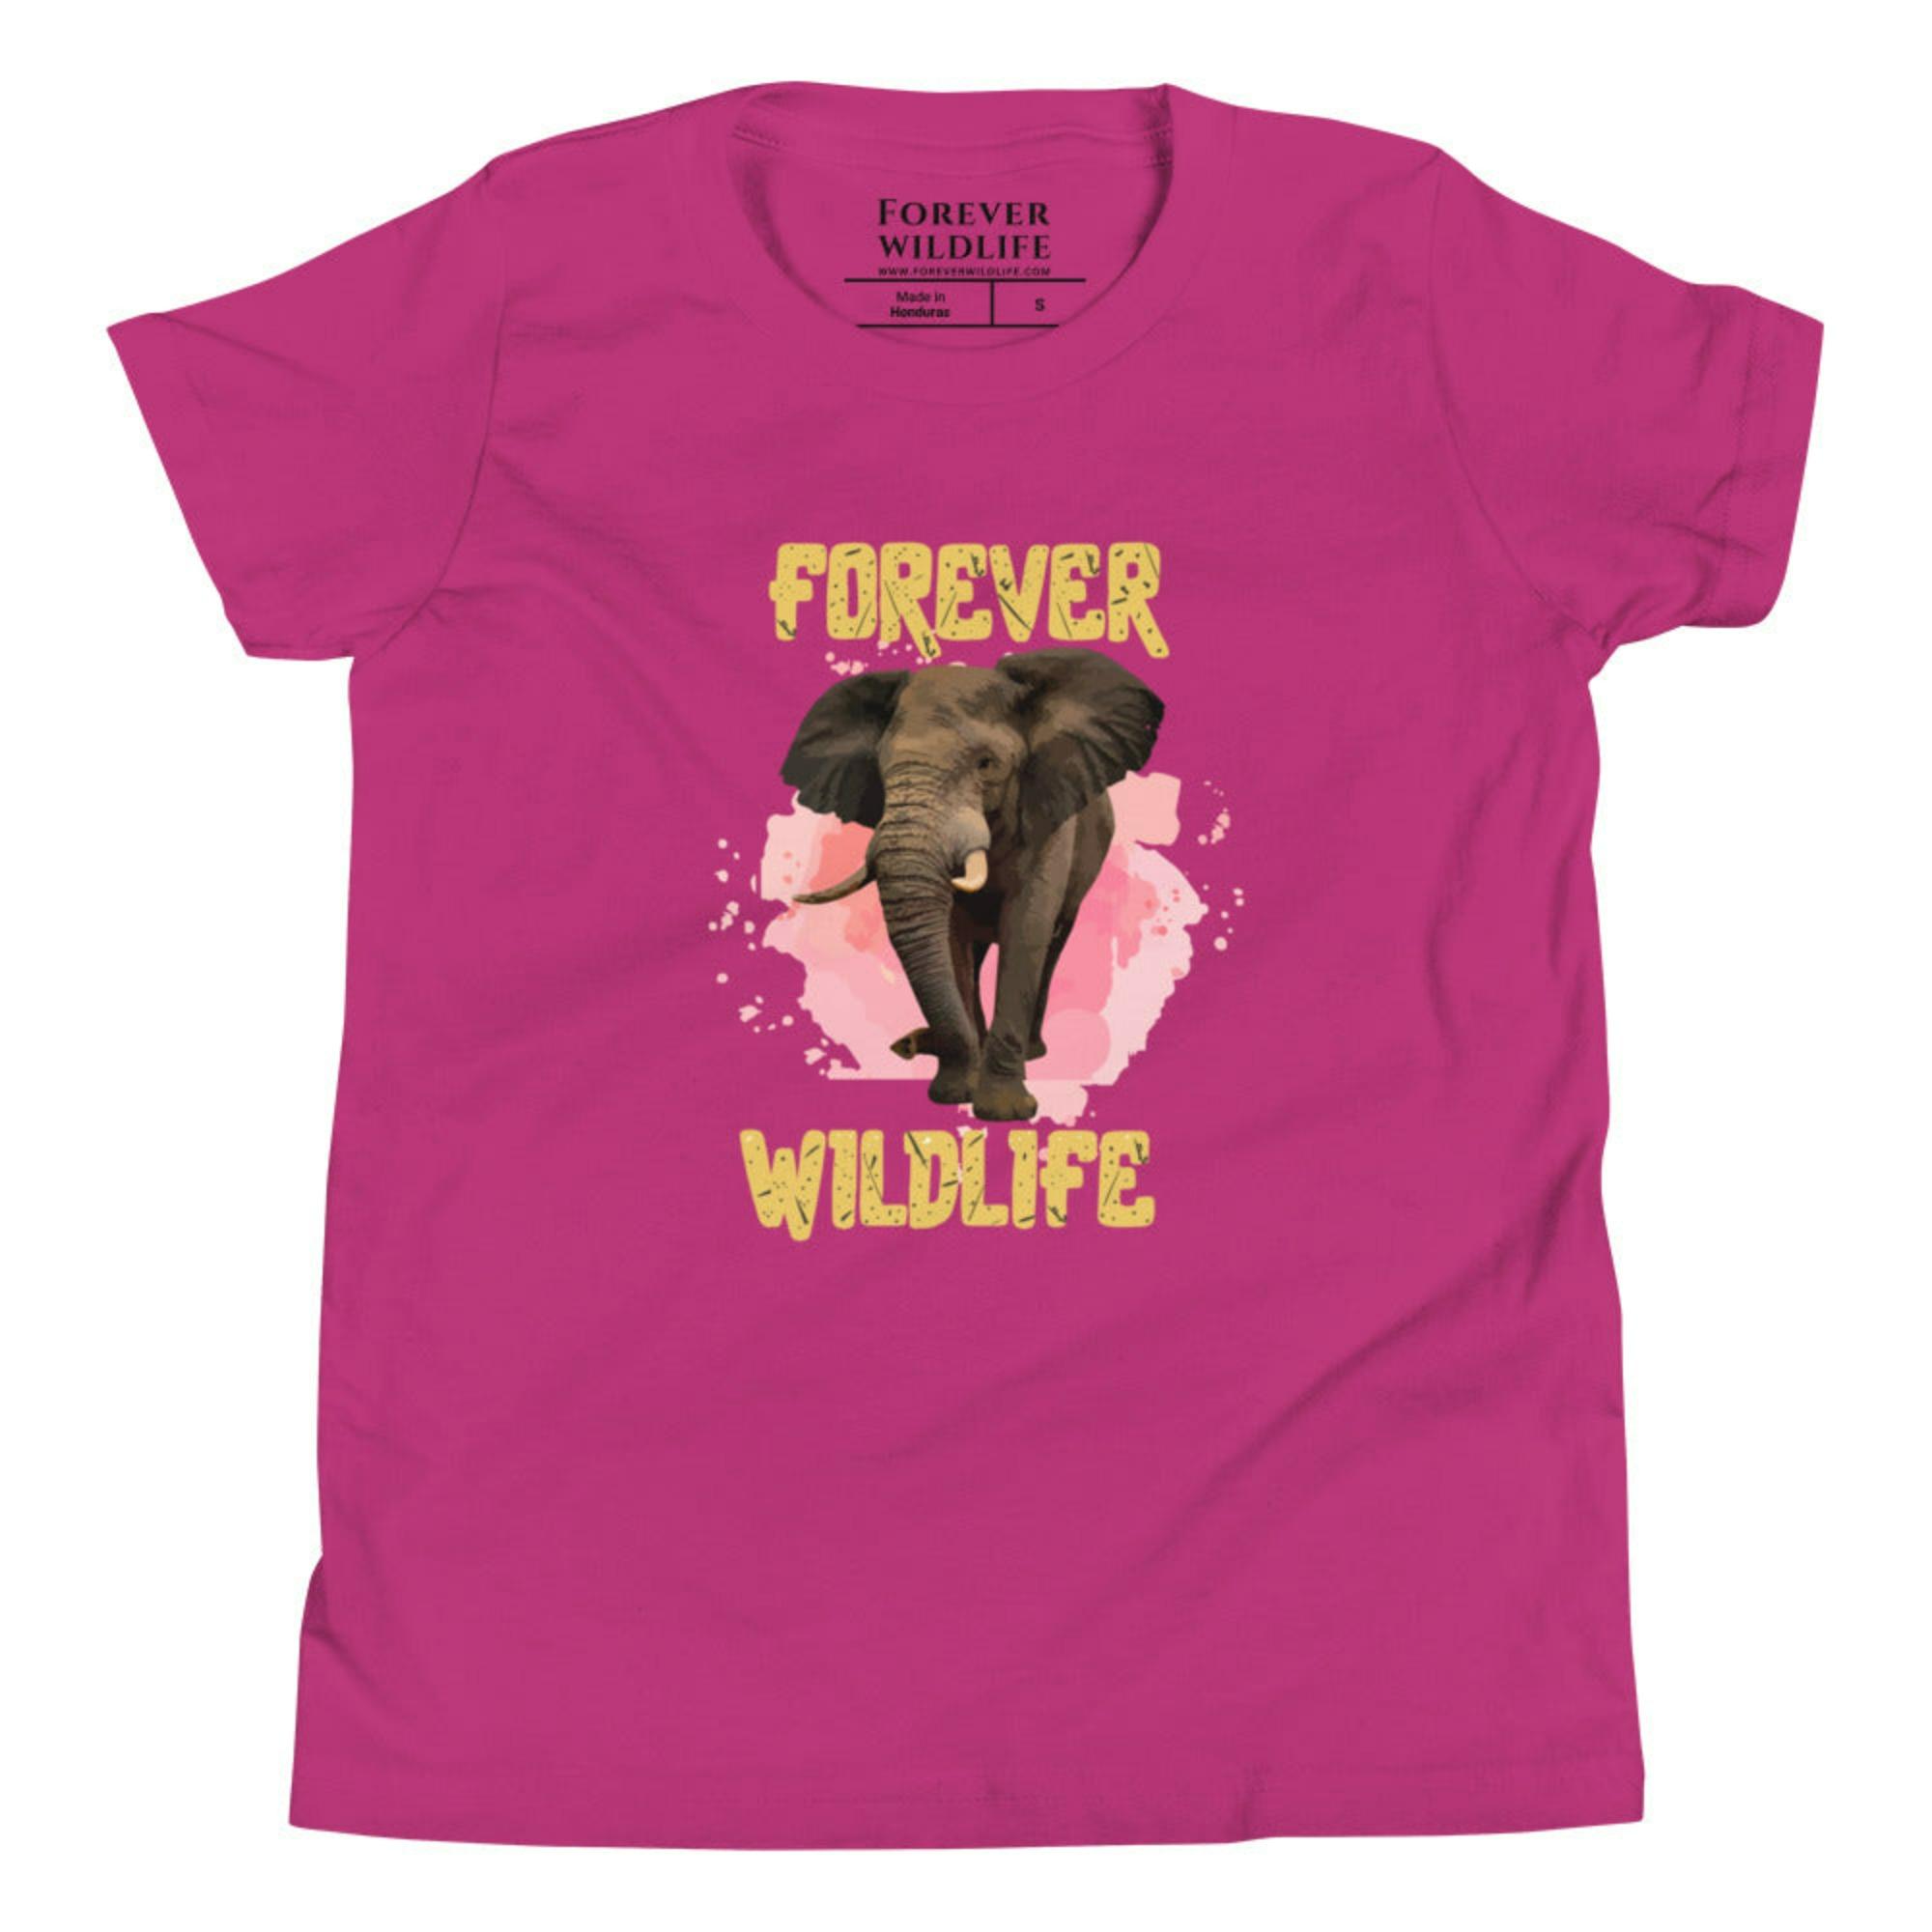 Berry Elephant Youth T-Shirt with Elephant graphic as part of Wildlife T Shirts, Wildlife Clothing & Apparel by Forever Wildlife